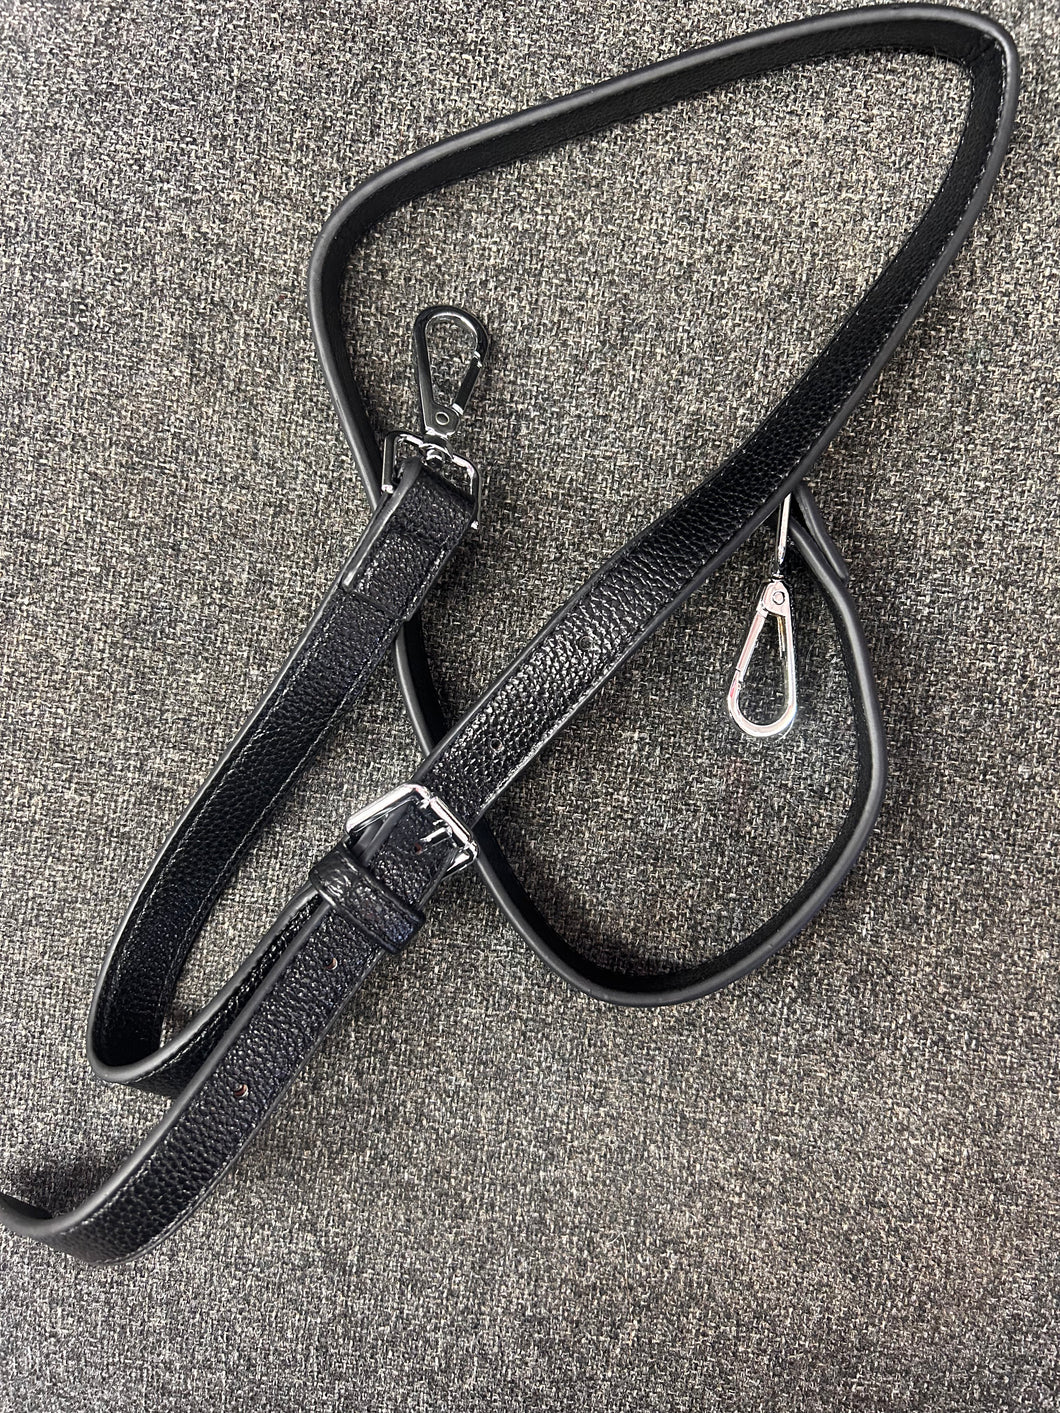 BAG STRAP BLACK WITH SILVER CLASP 107-122CM